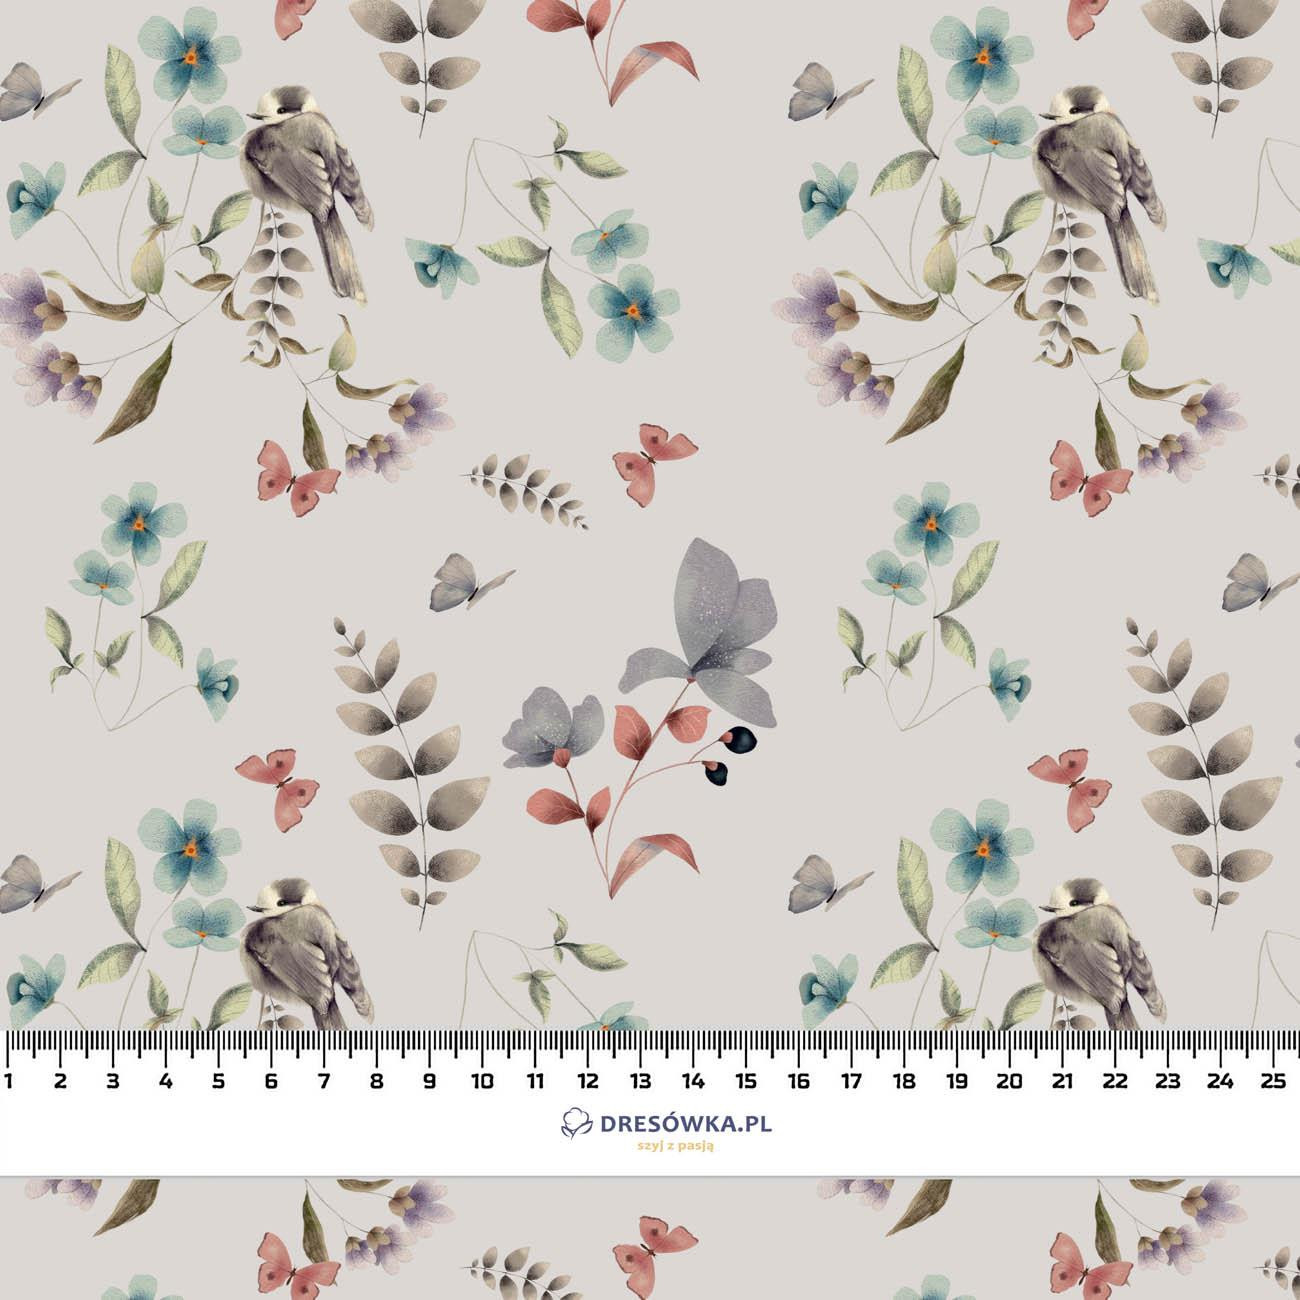 BIRDS AND BUTTERFLIES (INTO THE WOODS) - Cotton woven fabric